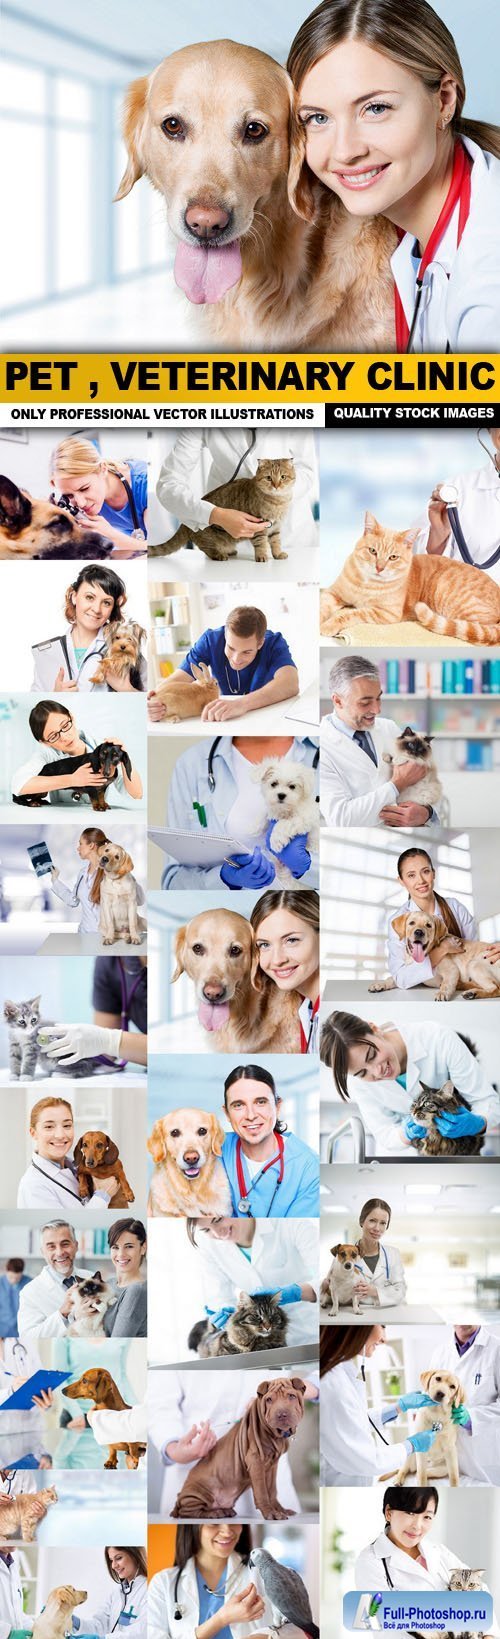 Pet , Veterinary Clinic - 25 HQ Images